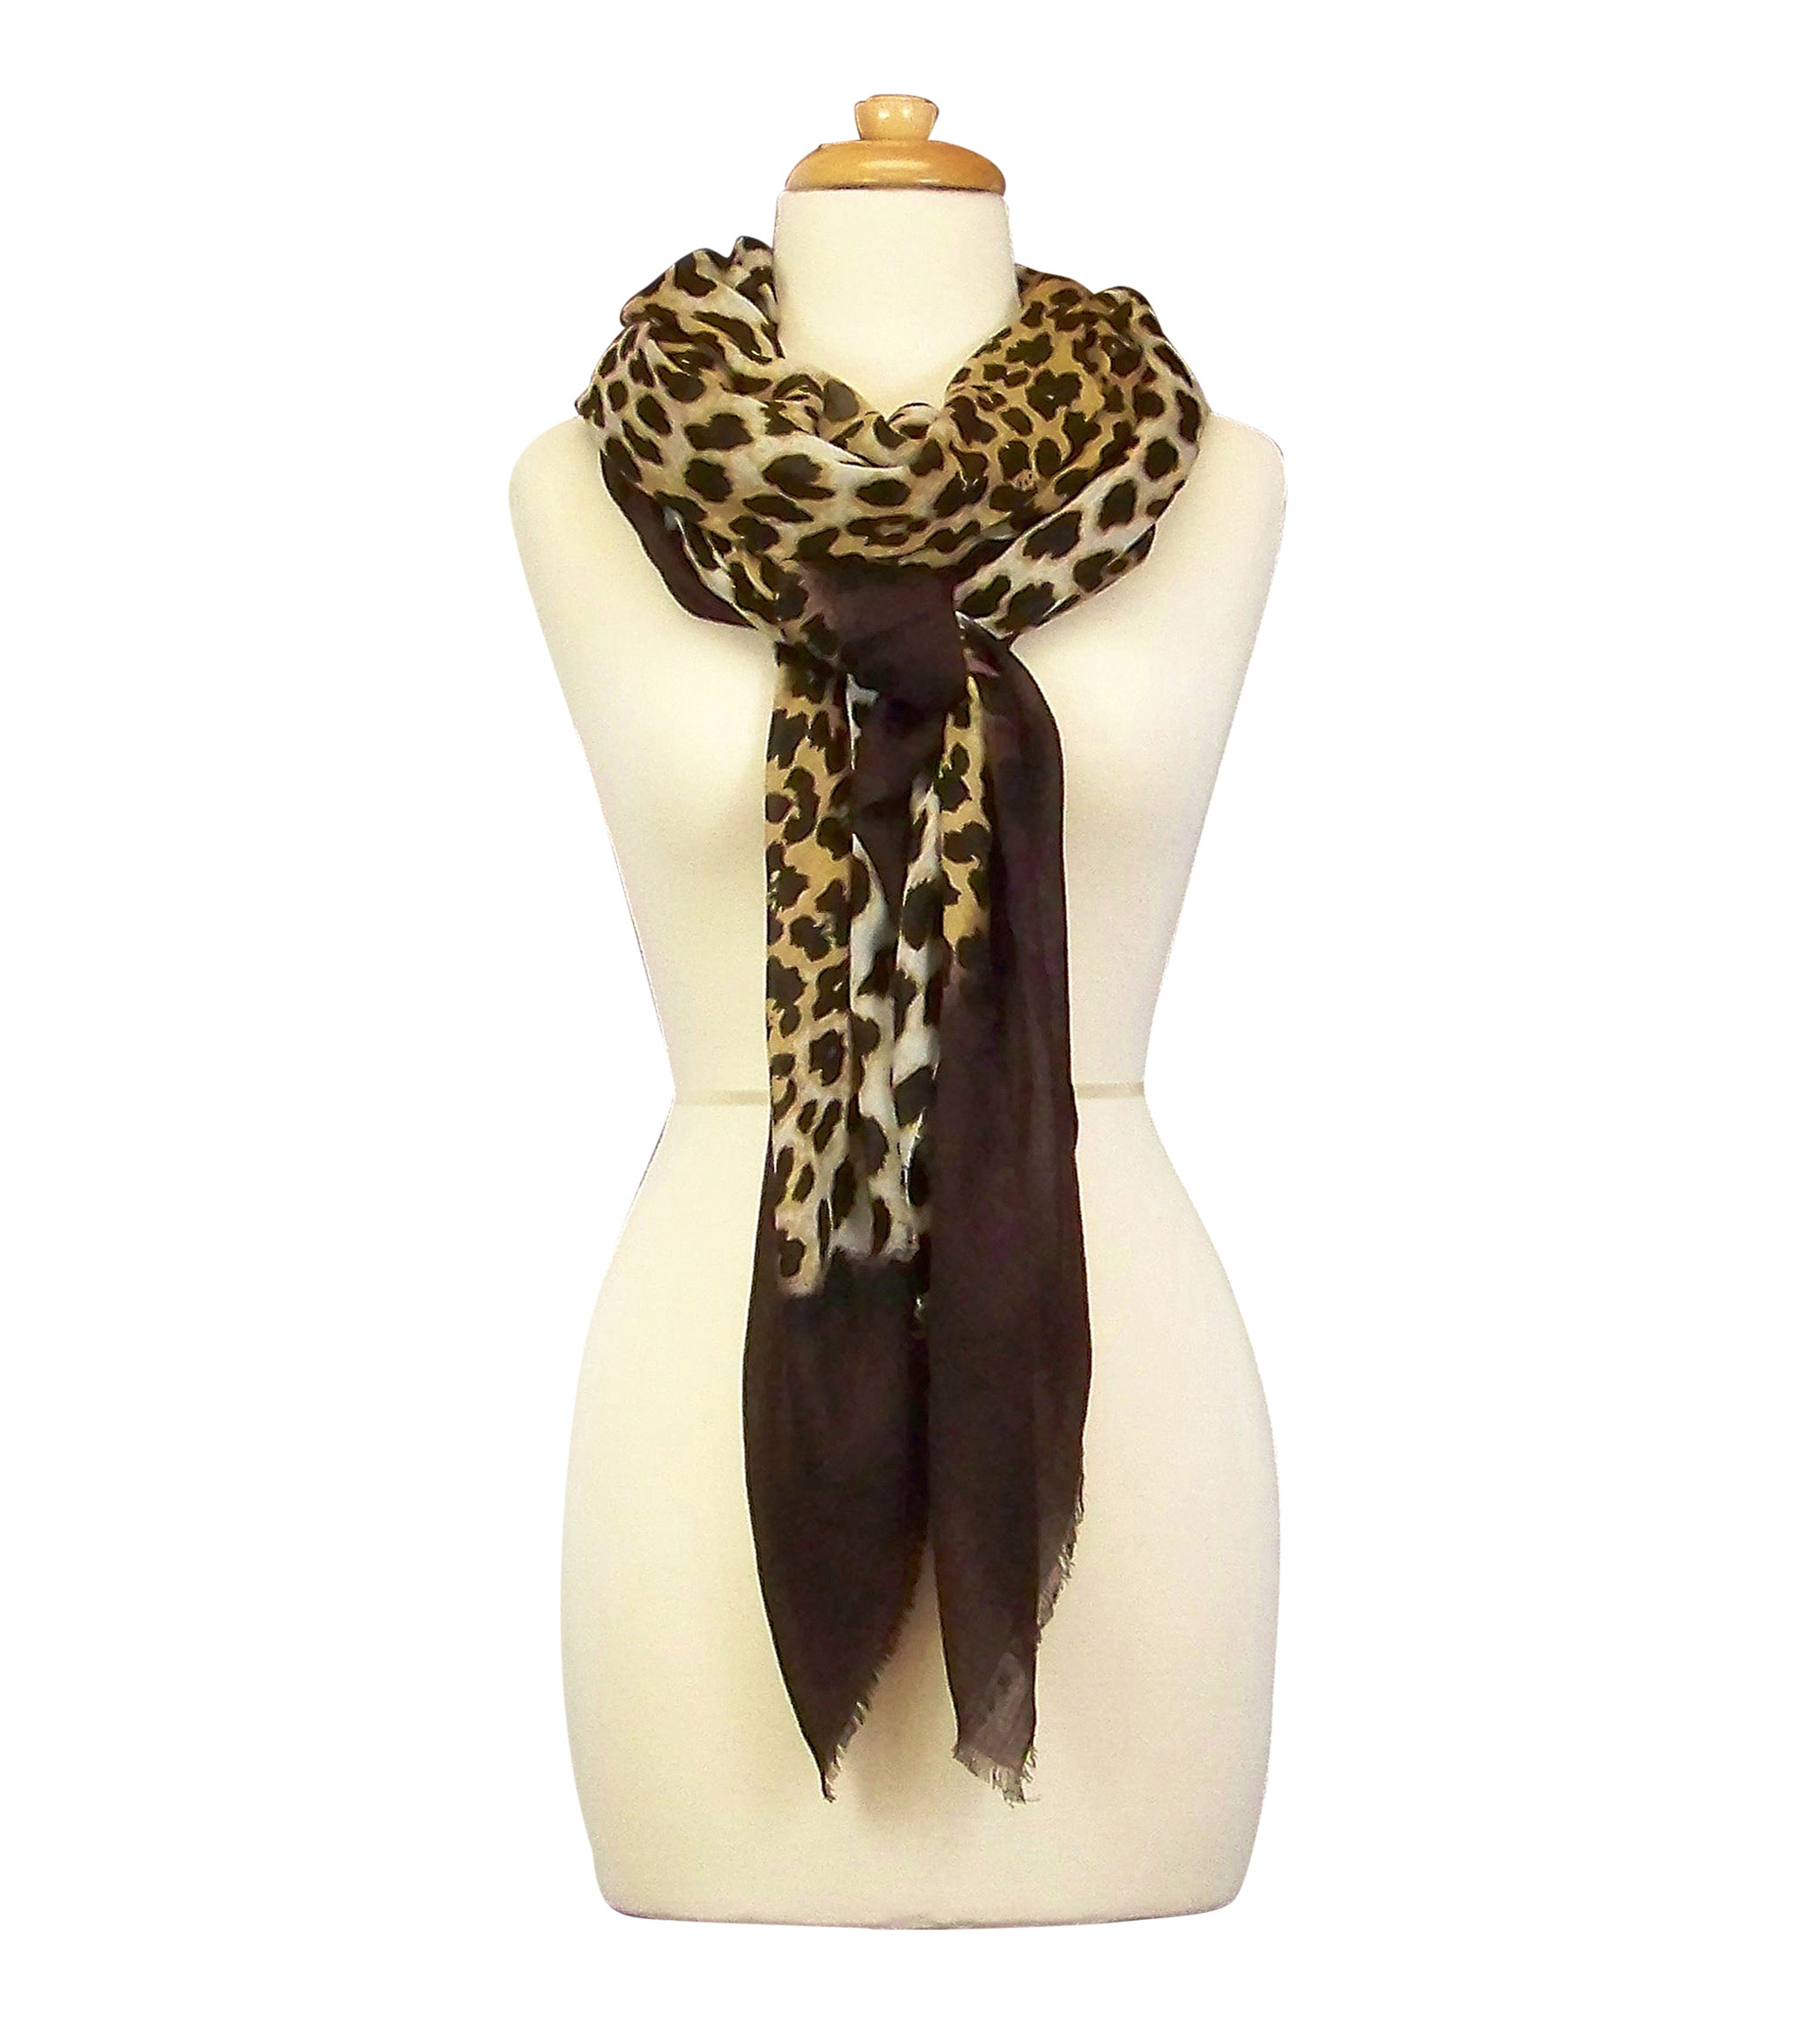 Mannequin Wearing Blue Pacific Animal Print Dip Cashmere and Silk Scarf in Dark Coffee Brown and Tan